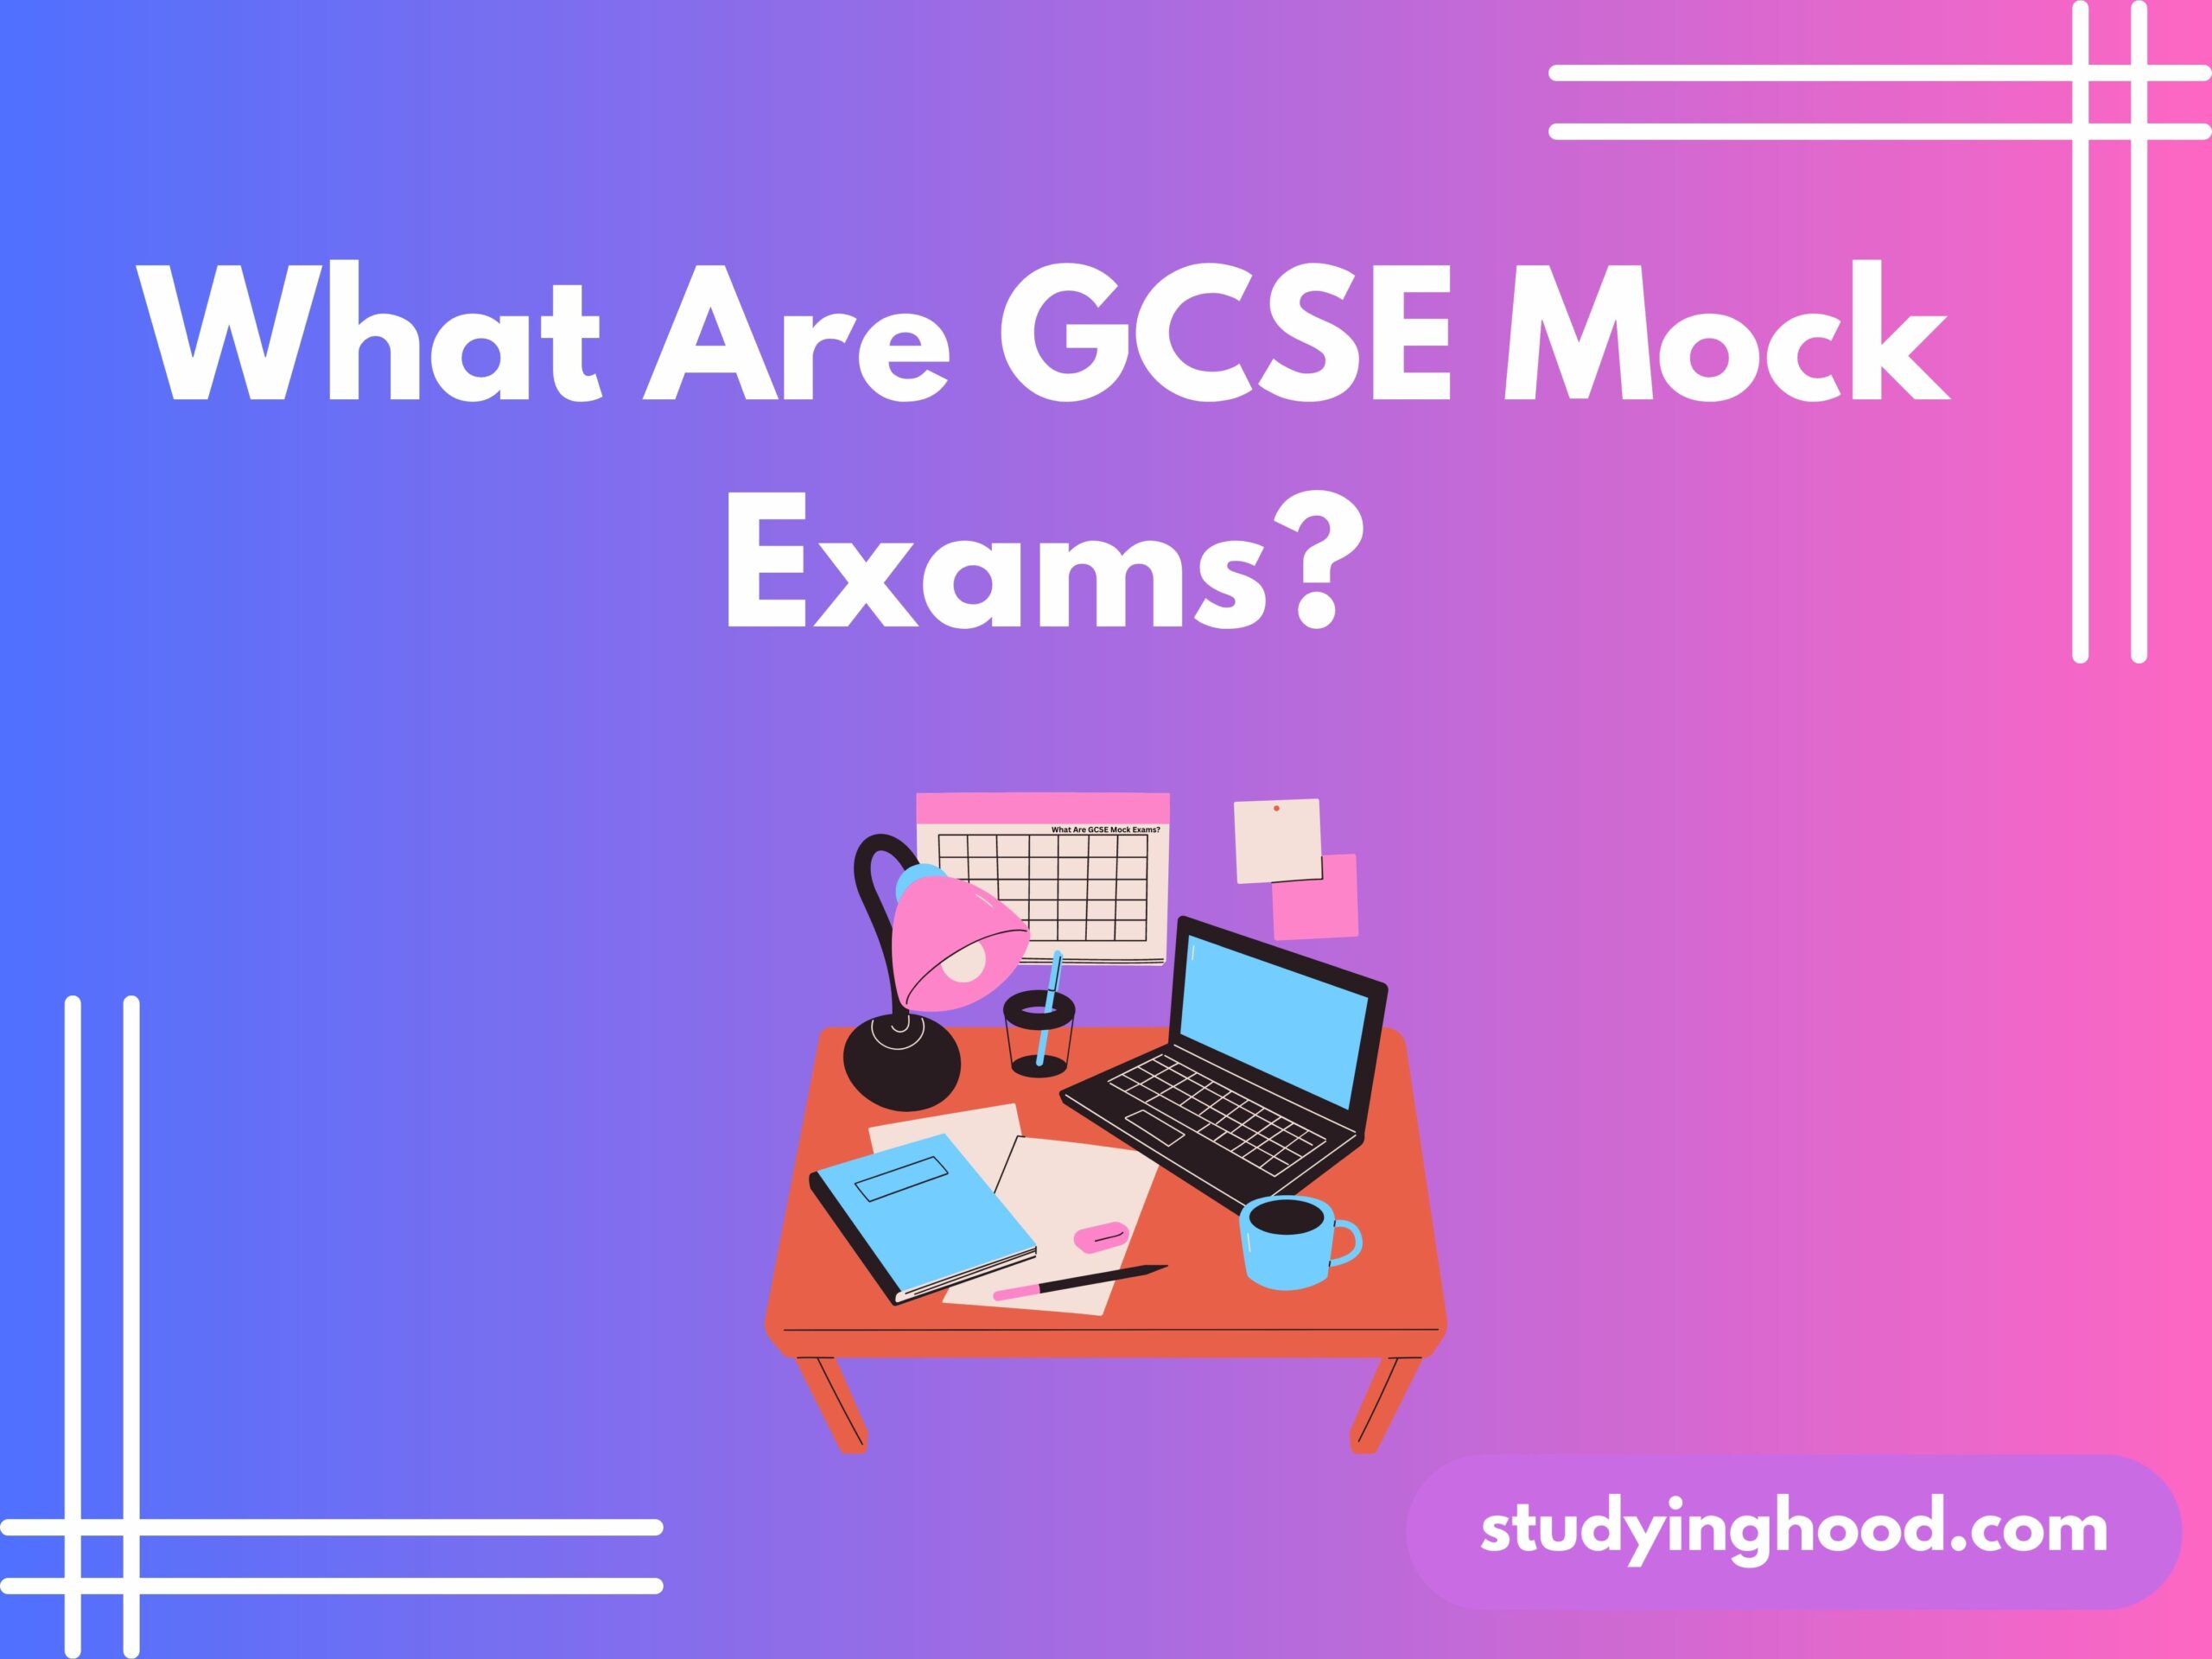 What Are GCSE Mock Exams?